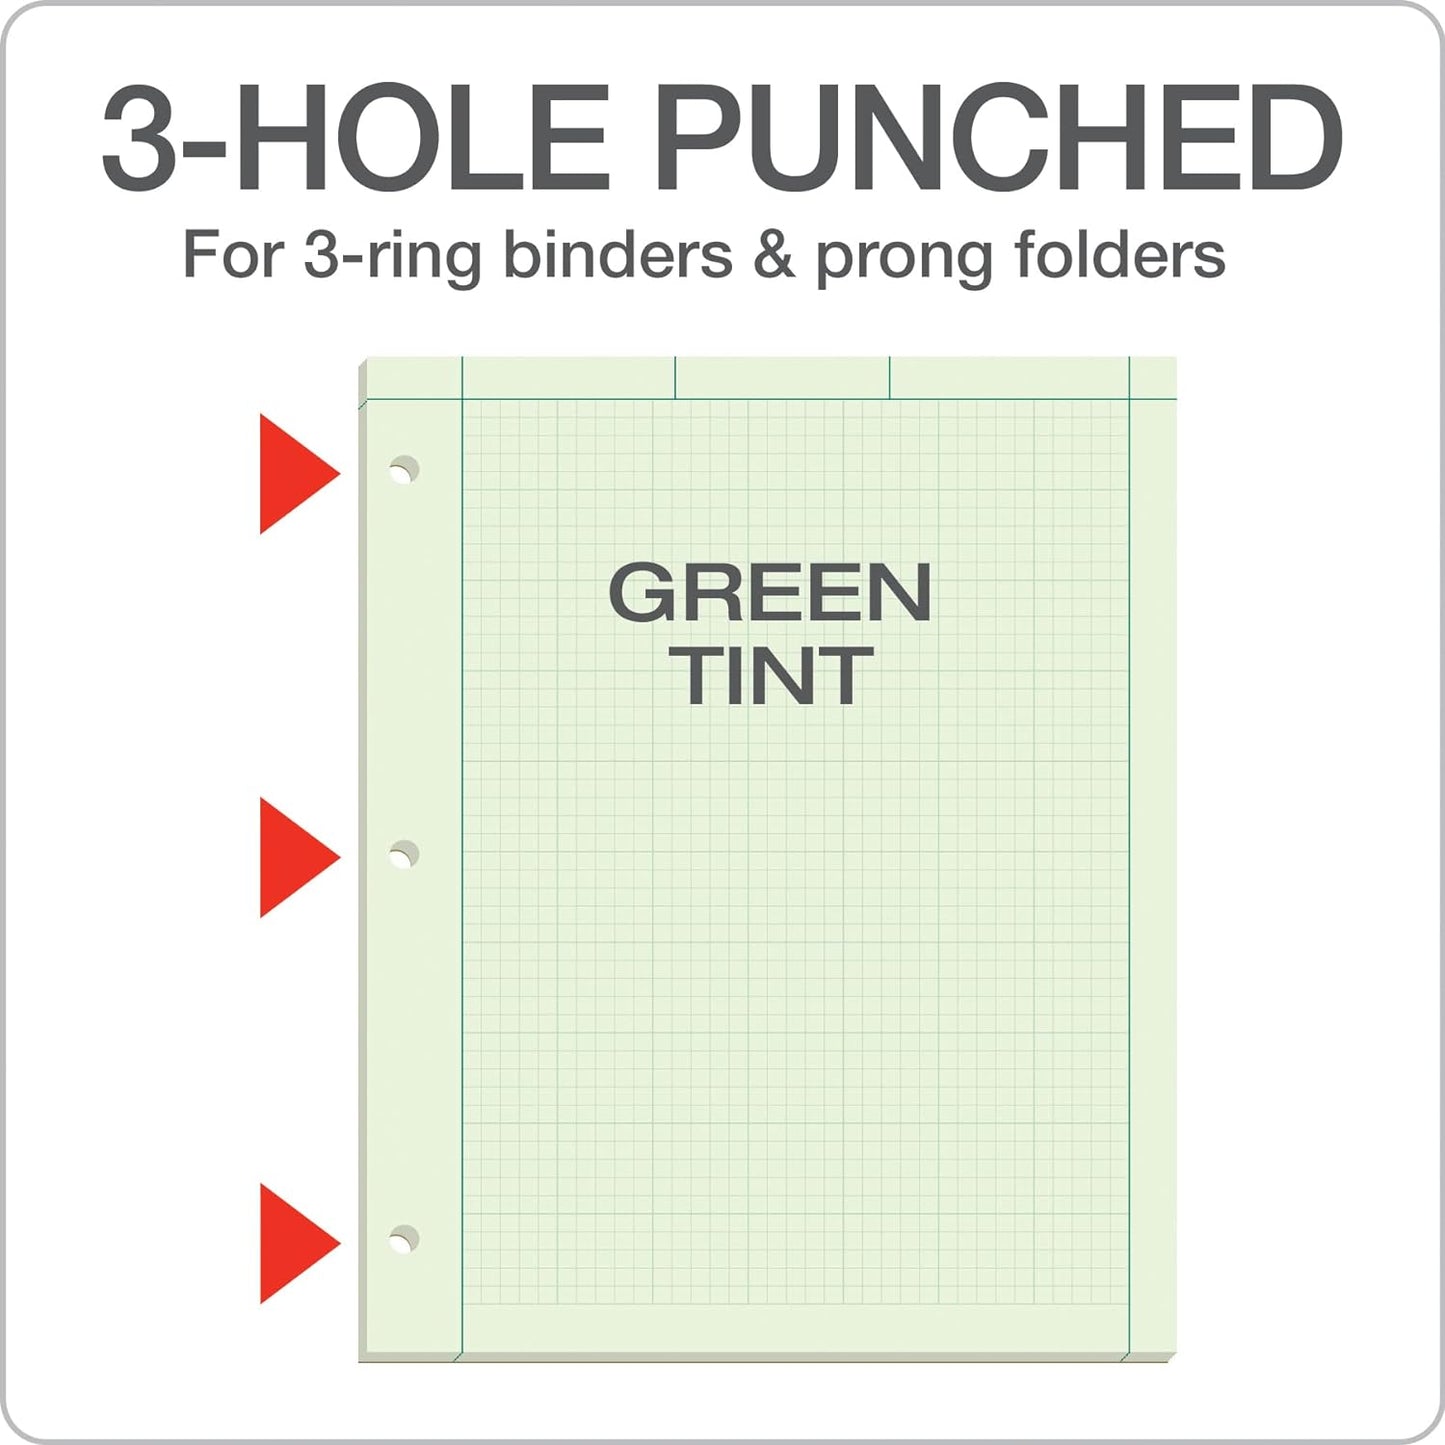 Engineering Computation Pads 3 Pk, 8-1/2" X 11", Glue, 5 X 5 Graph Rule on Back, Green Tint Paper, 3-Hole Punched, 100 Sheets per Pad (35507A)